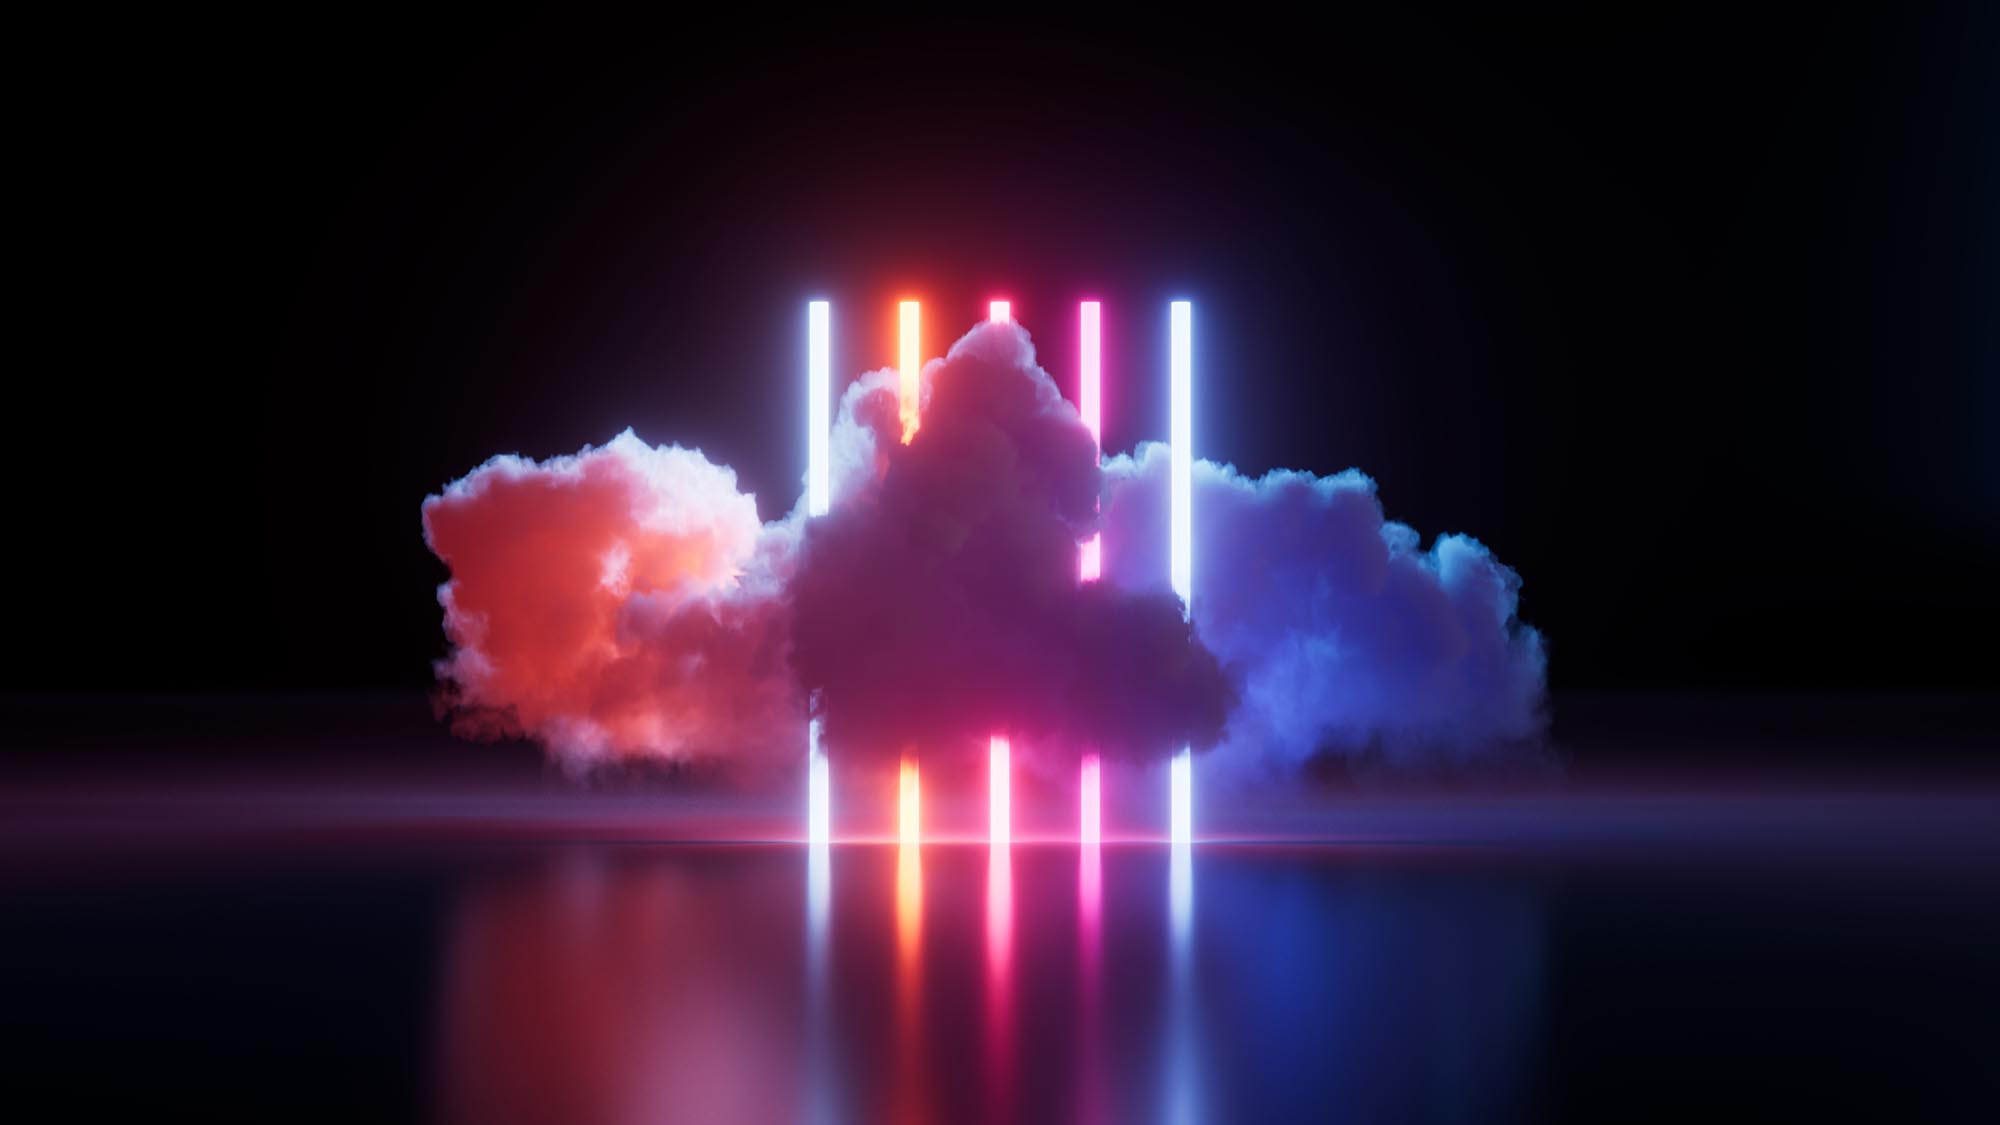 Neon vertical lines and glowing colorful clouds